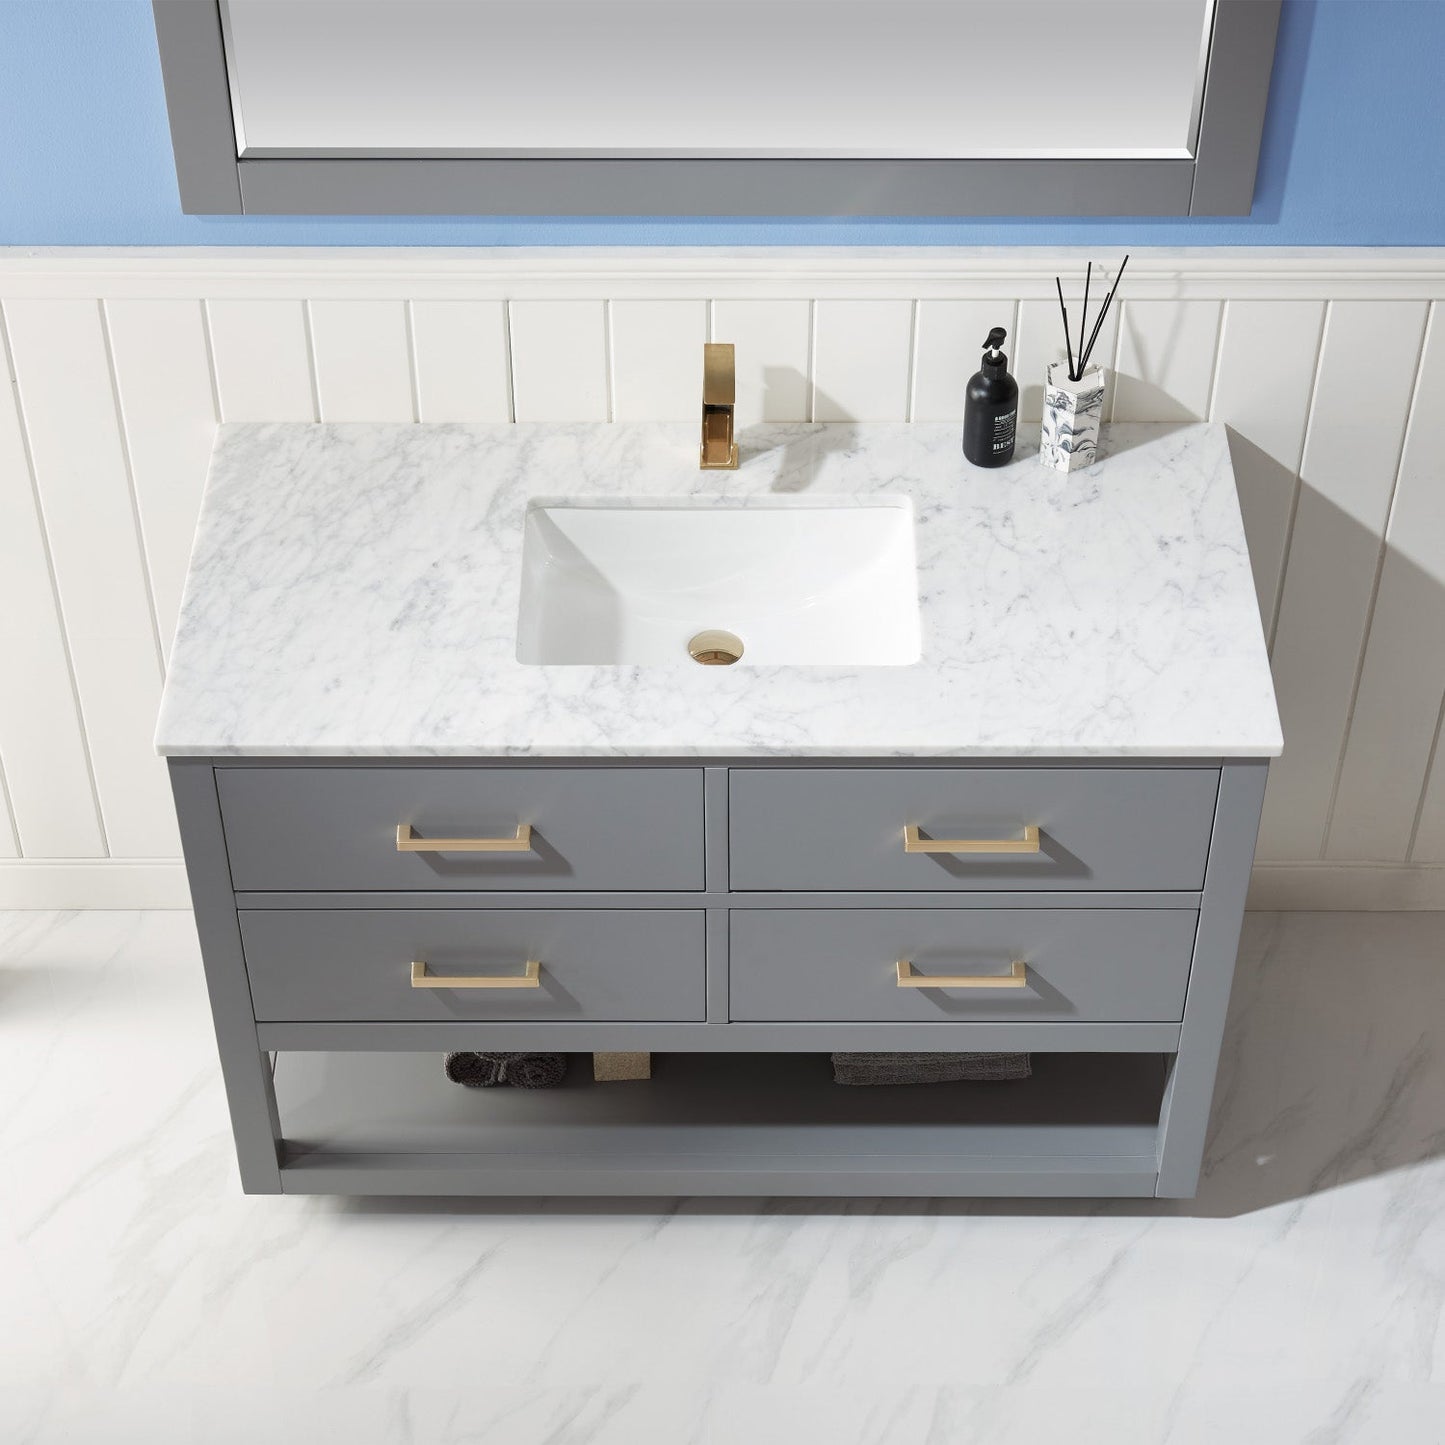 Remi 48" Single Bathroom Vanity Set in Gray and Carrara White Marble Countertop with Mirror